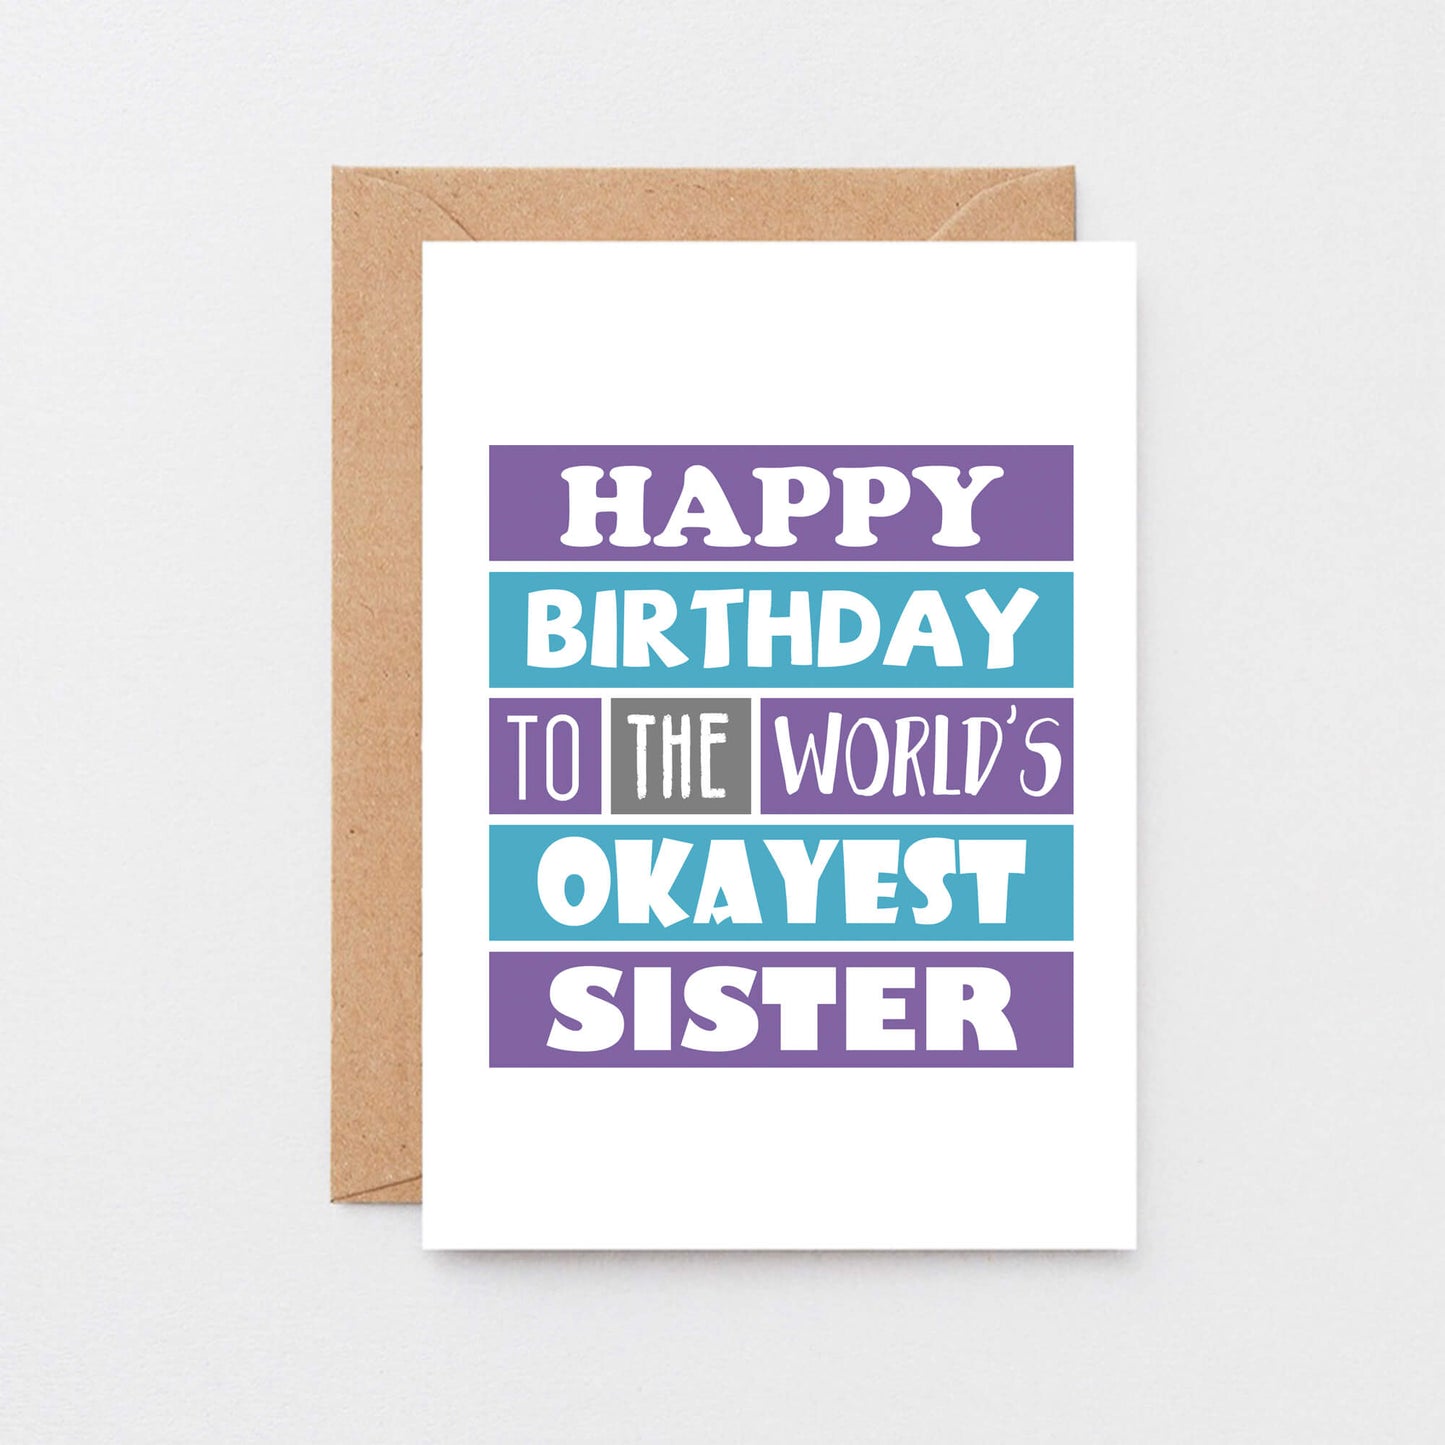 Sister Birthday Card by SixElevenCreations. Reads Happy birthday to the world's okayest sister. Product Code SE0168A6